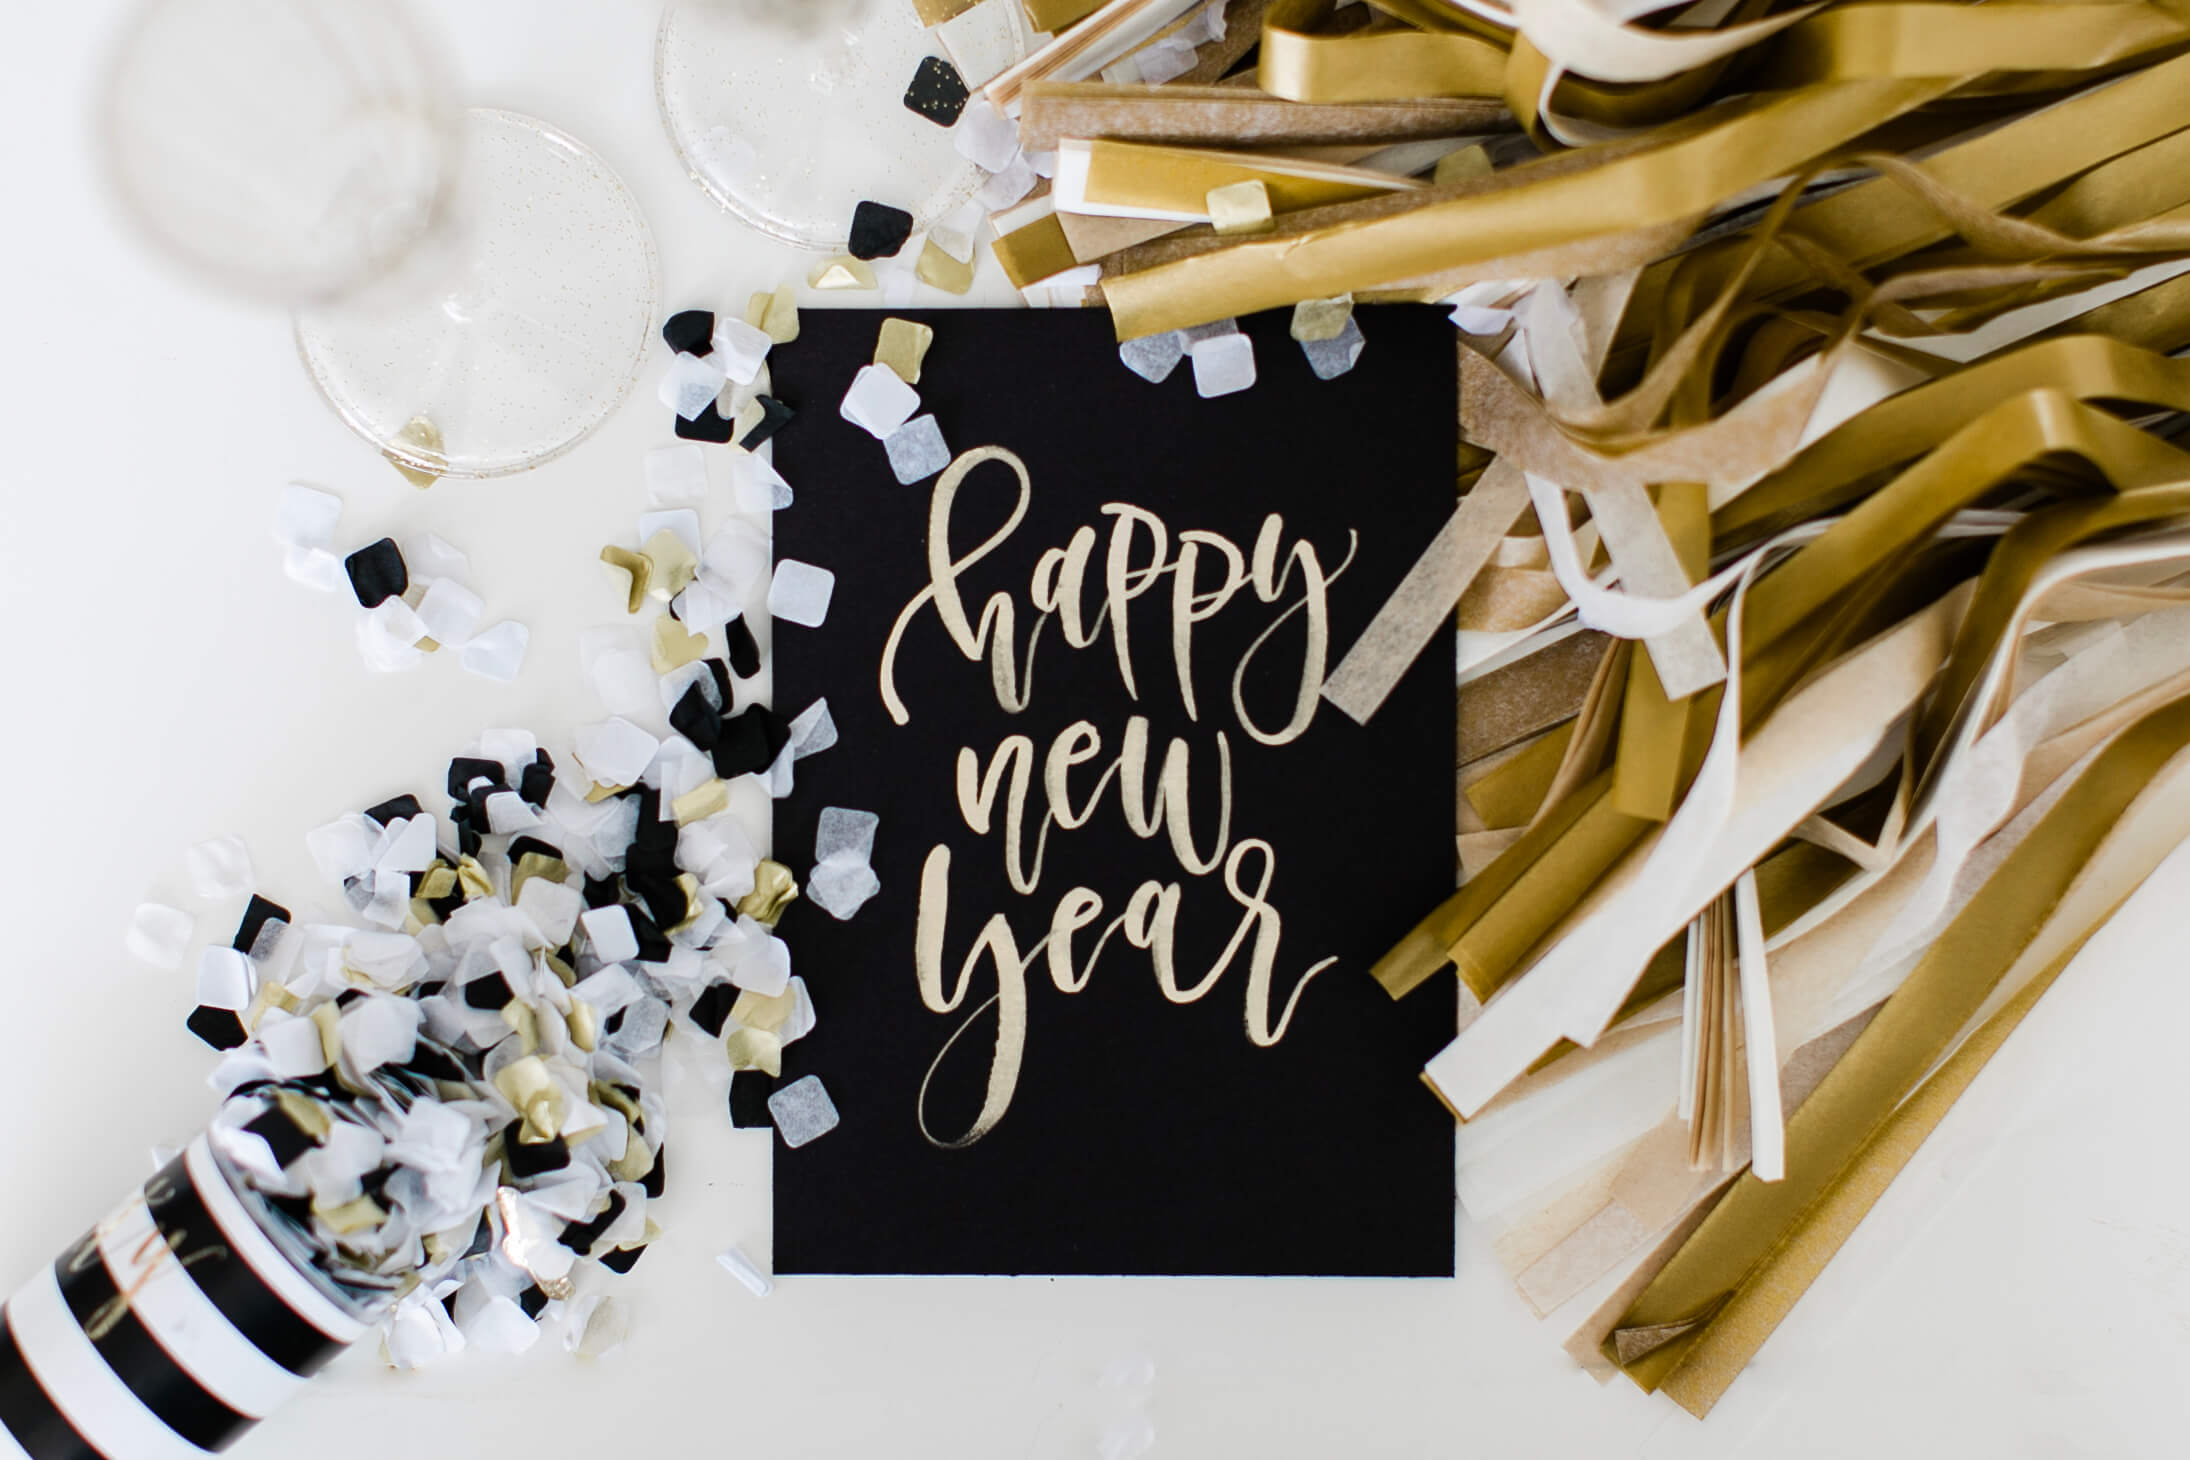 New year card with confetti and champagne glasses.